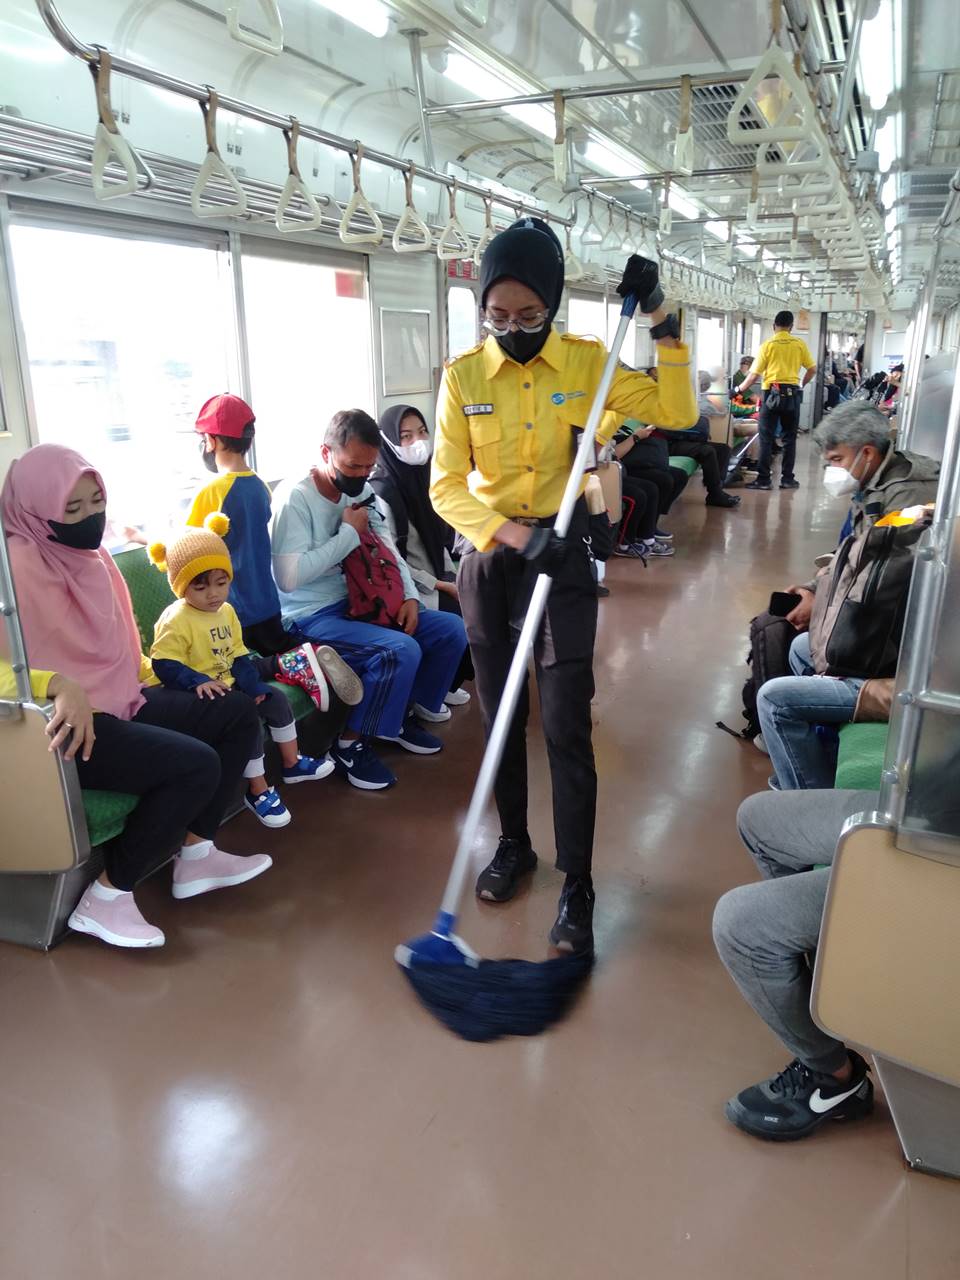 Cleaning Service Officers on Duty : Indonesia Commuter Train